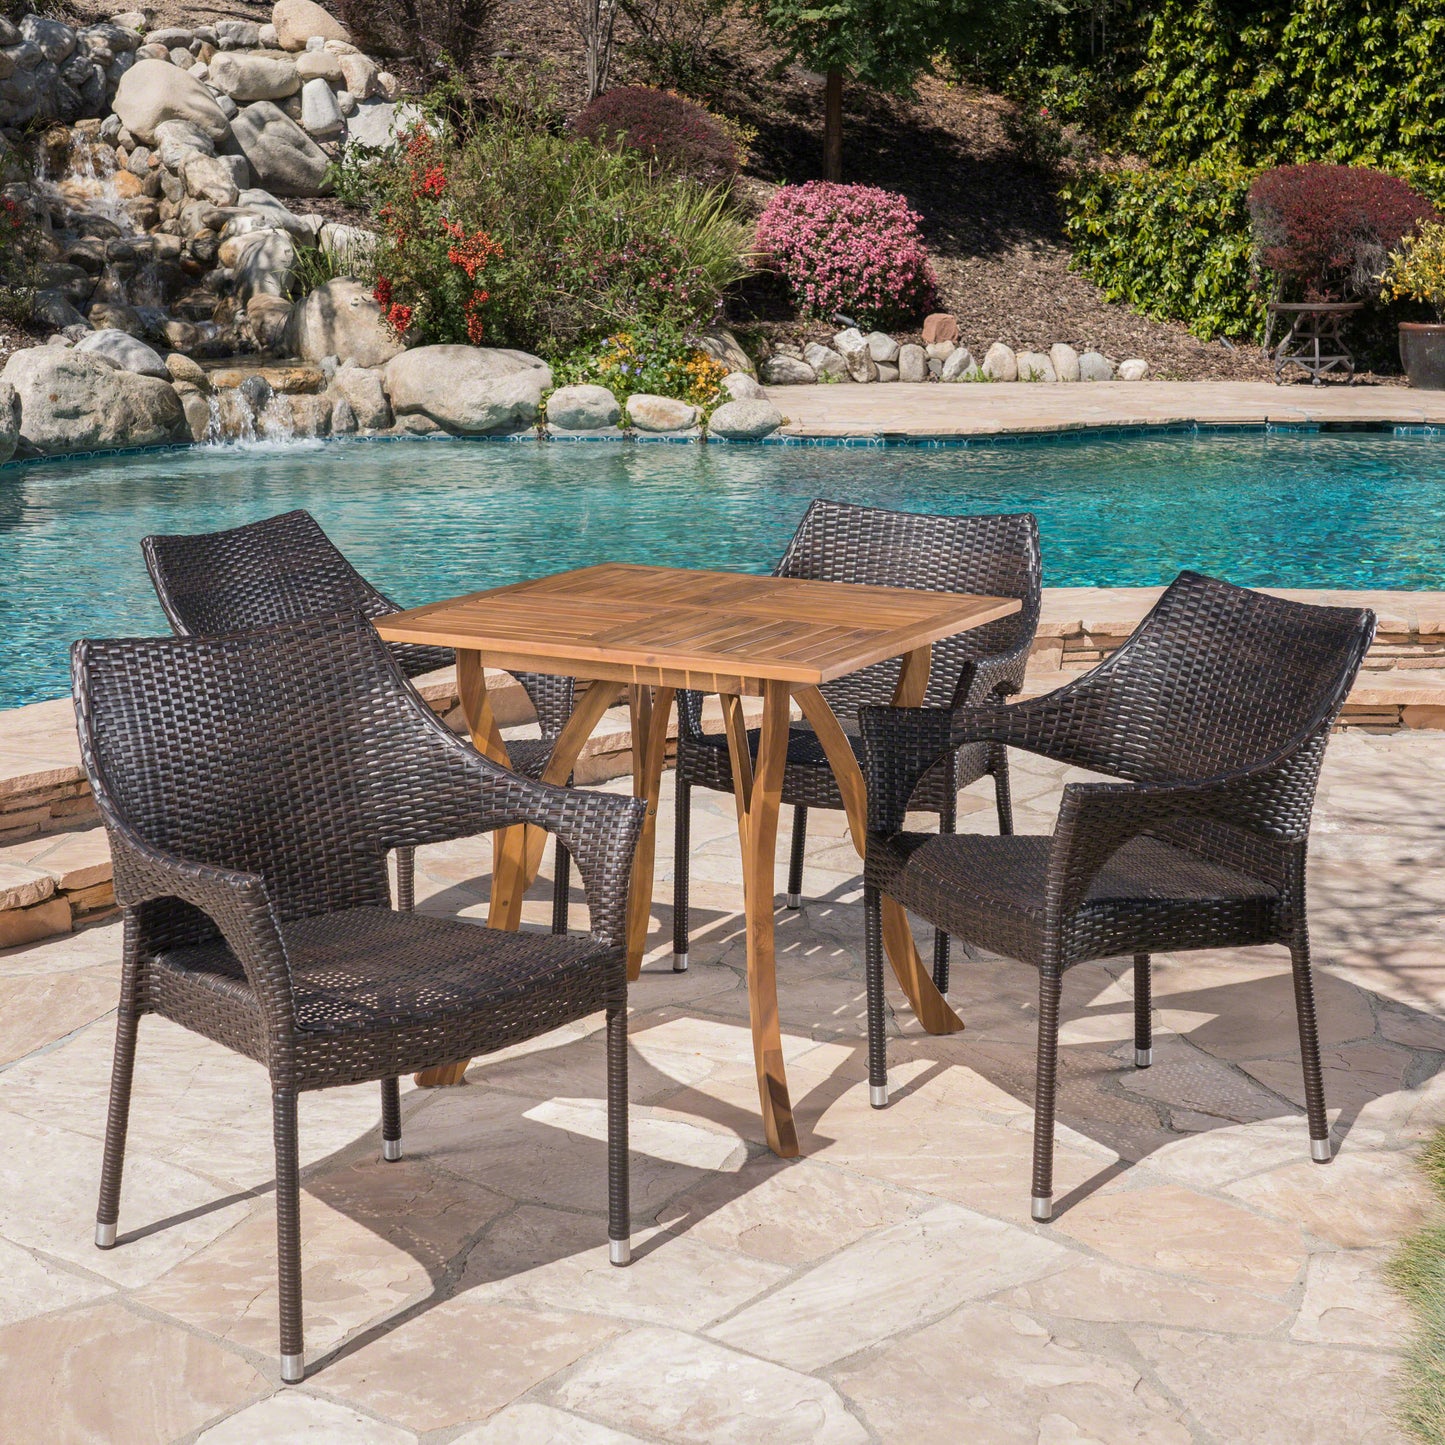 Colin Outdoor 5 Piece Acacia Wood and Wicker Square Dining Set